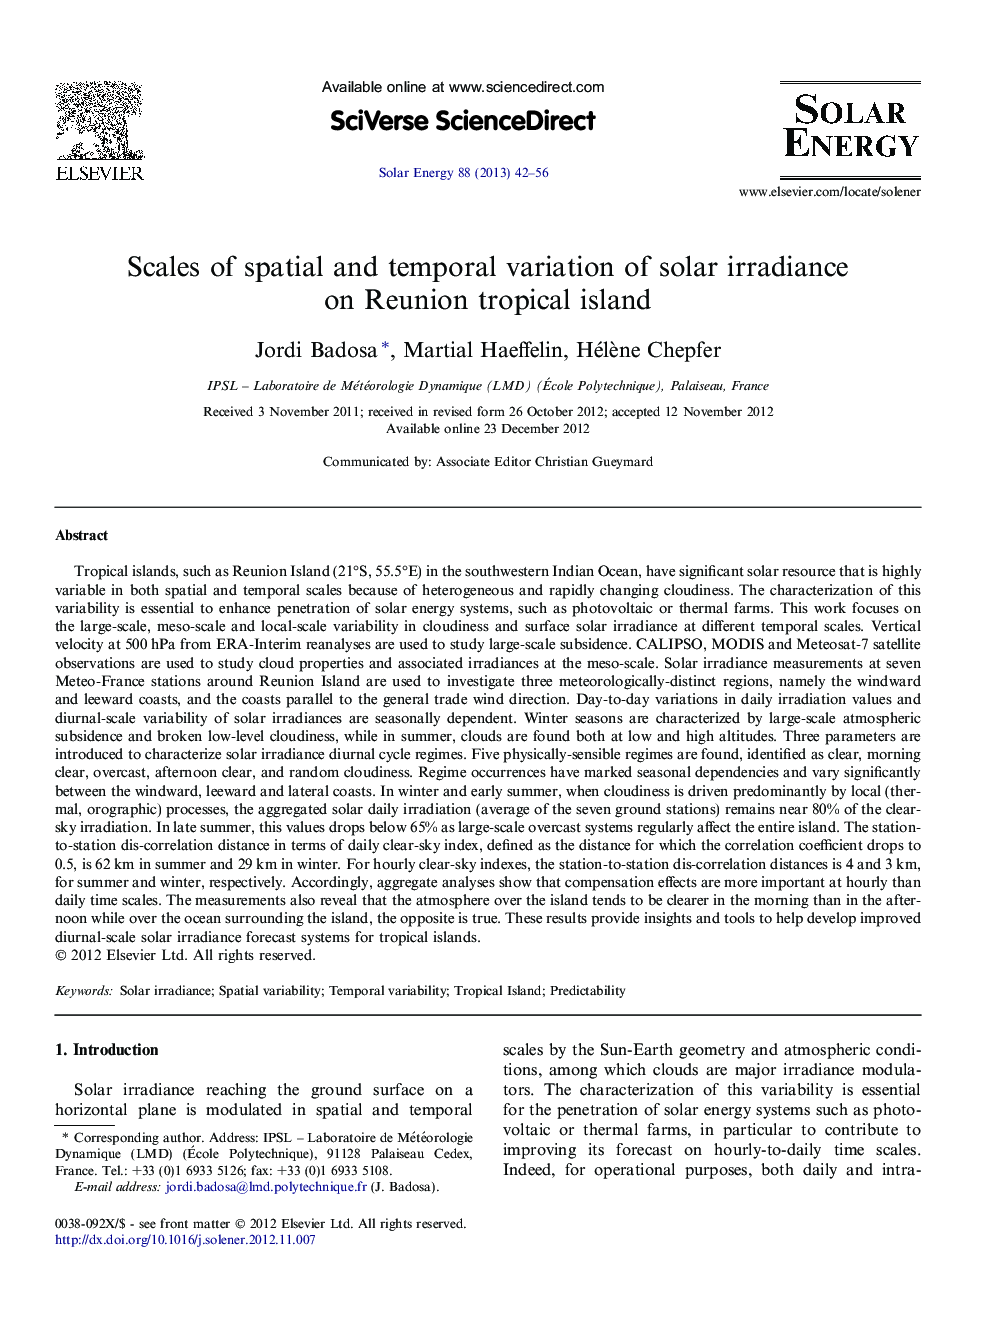 Scales of spatial and temporal variation of solar irradiance on Reunion tropical island